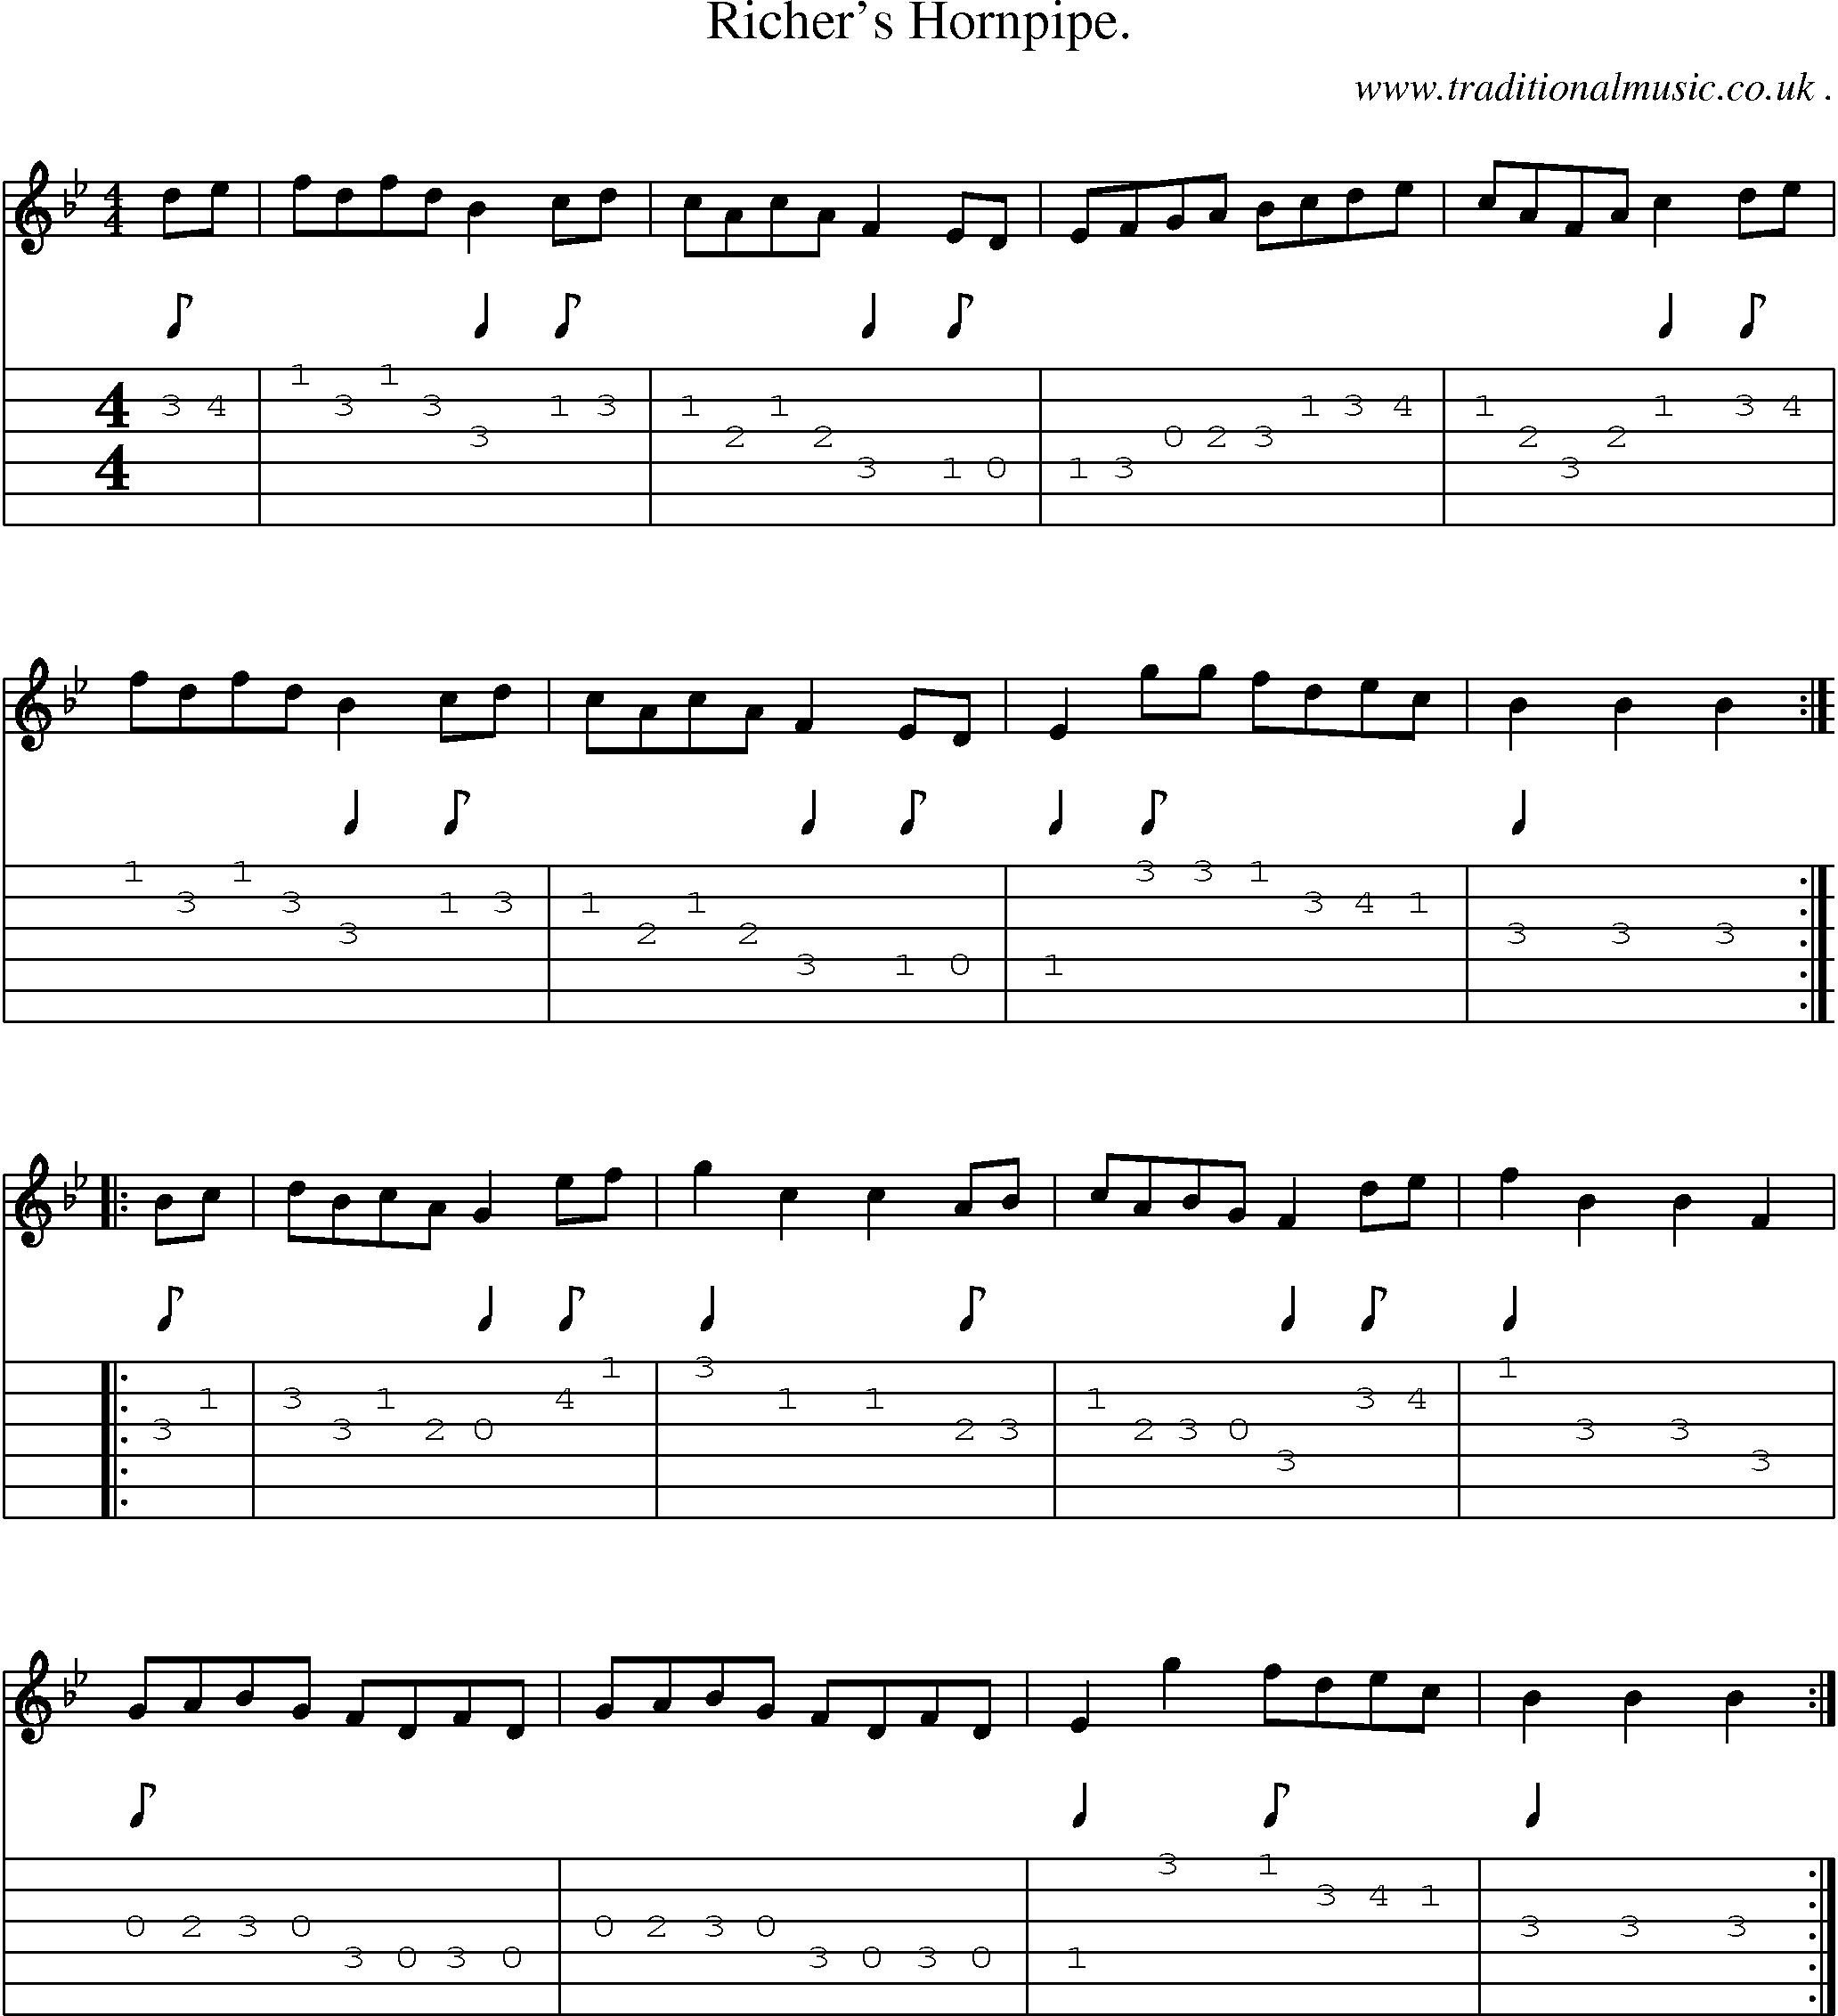 Sheet-Music and Guitar Tabs for Richers Hornpipe 